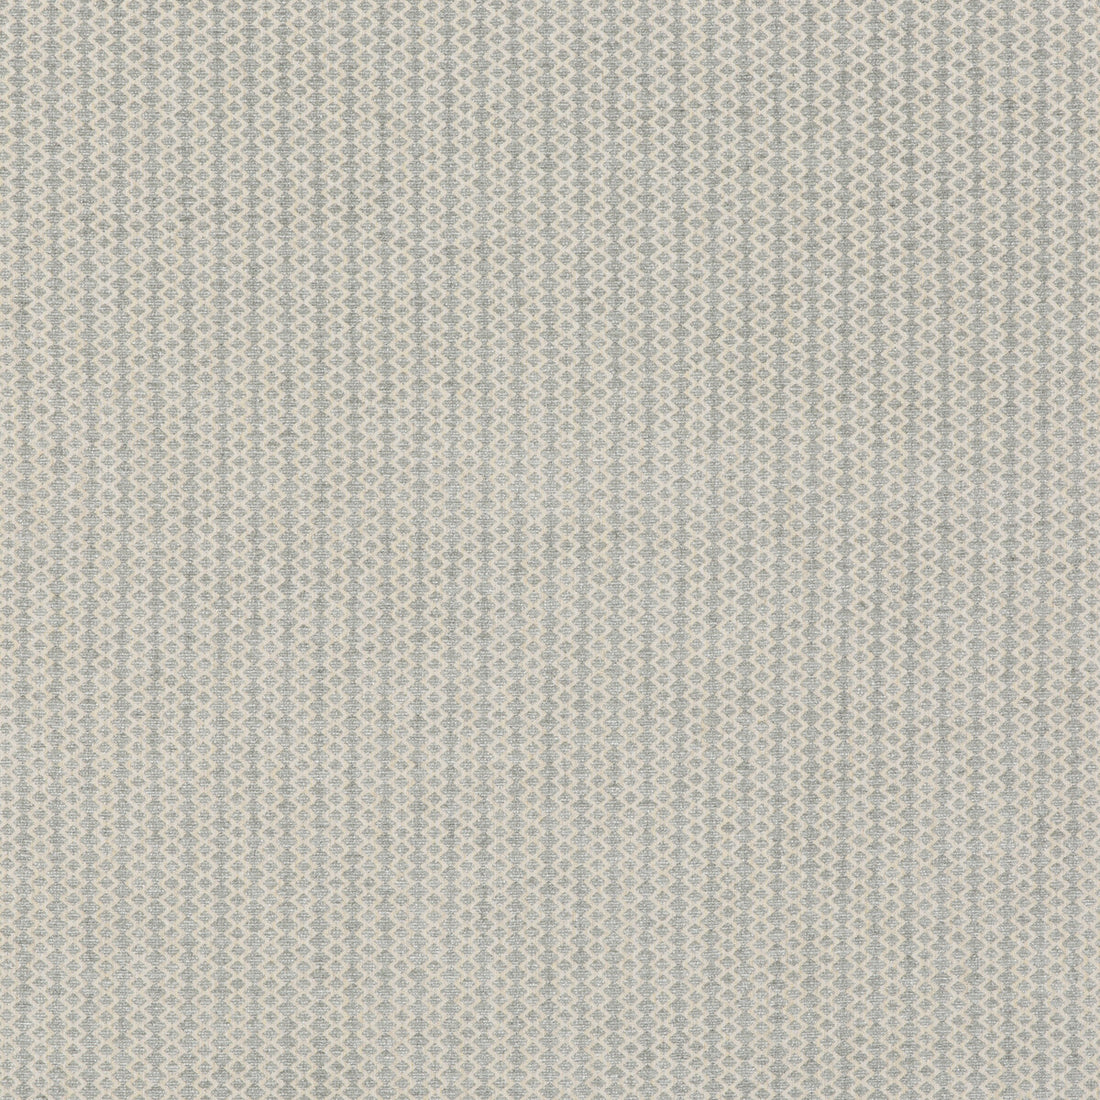 Harwood fabric in soft blue color - pattern BF10958.605.0 - by G P &amp; J Baker in the Baker House Textures collection